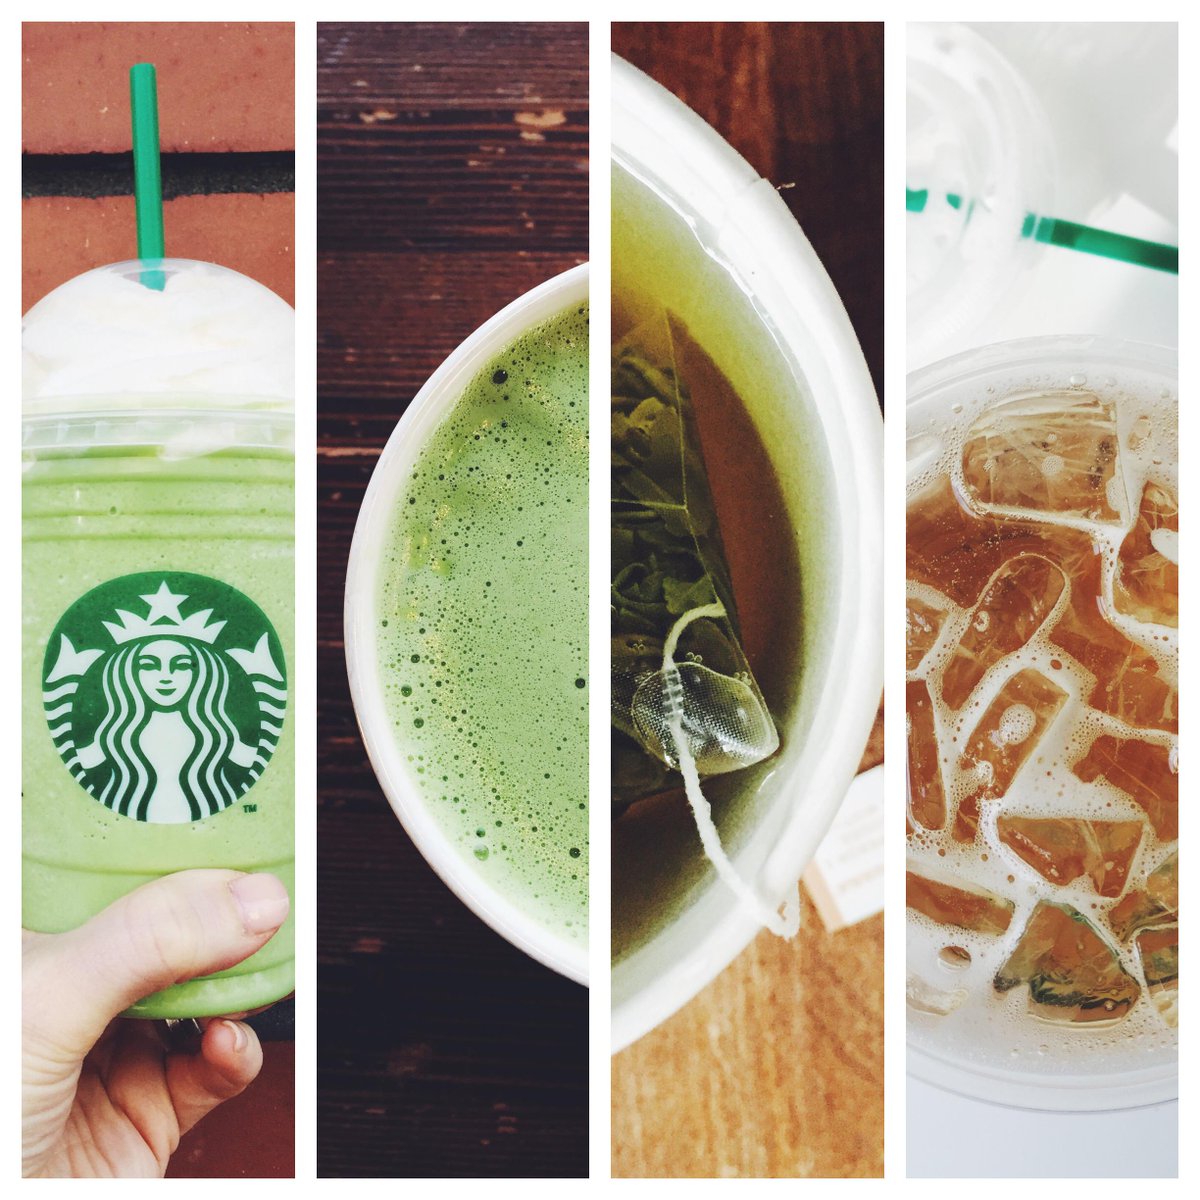 You can get green tea 4 ways—Frappuccino, latte, hot, or iced. #ProTip